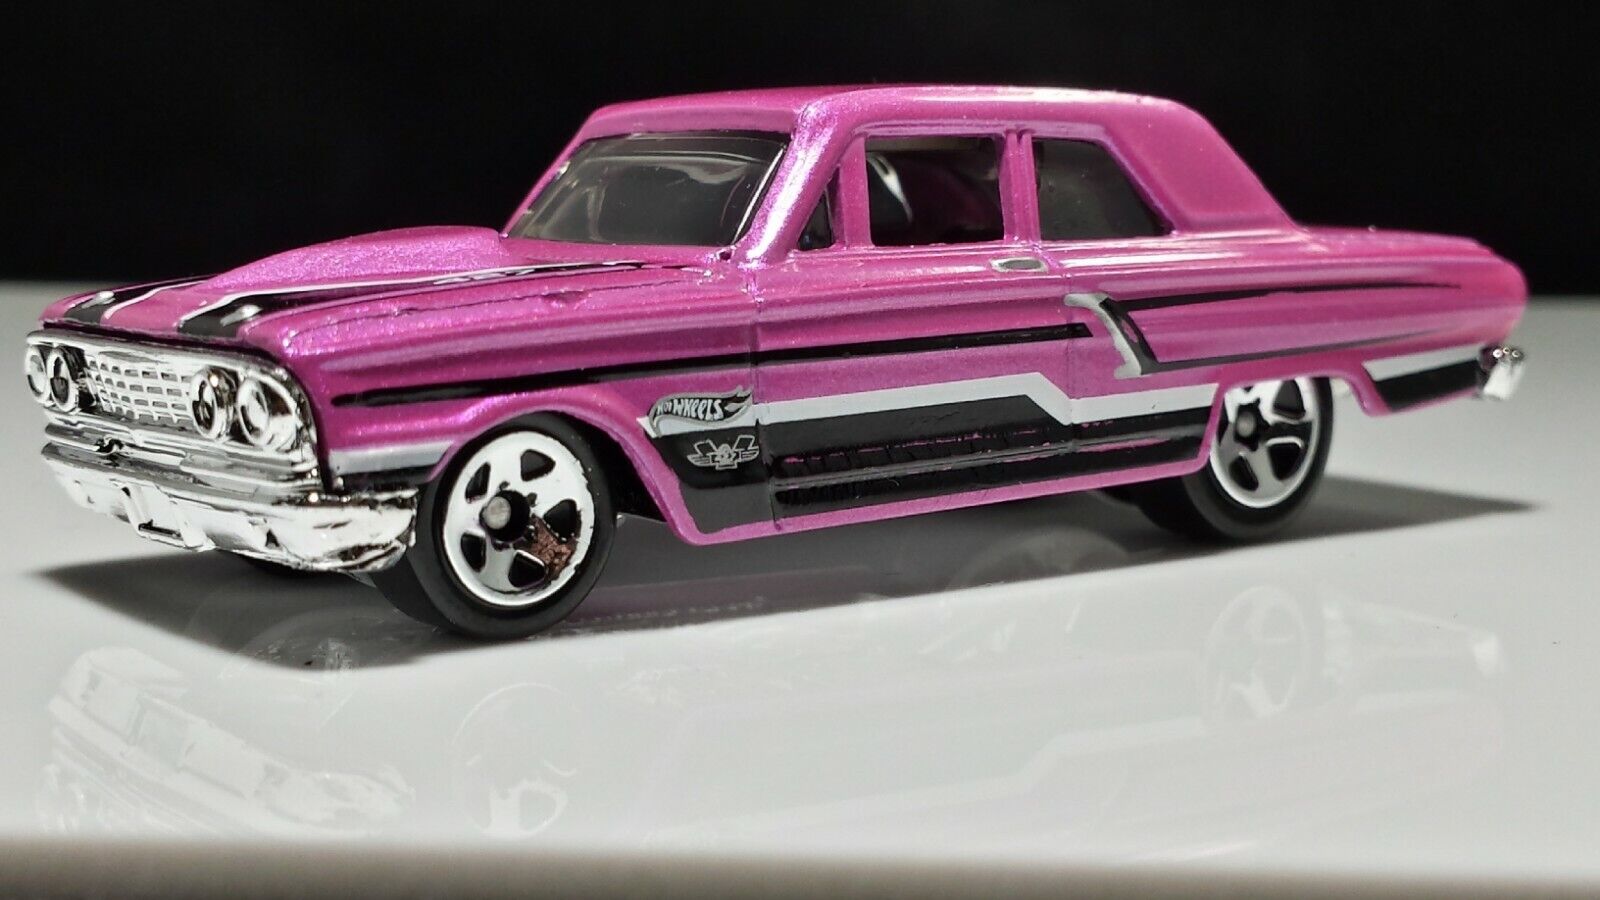 FORD THUNDERBOLT 427 MUSCLE  HOT PINK 1:64 SCALE DIECAST COLLECTOR MODEL CAR